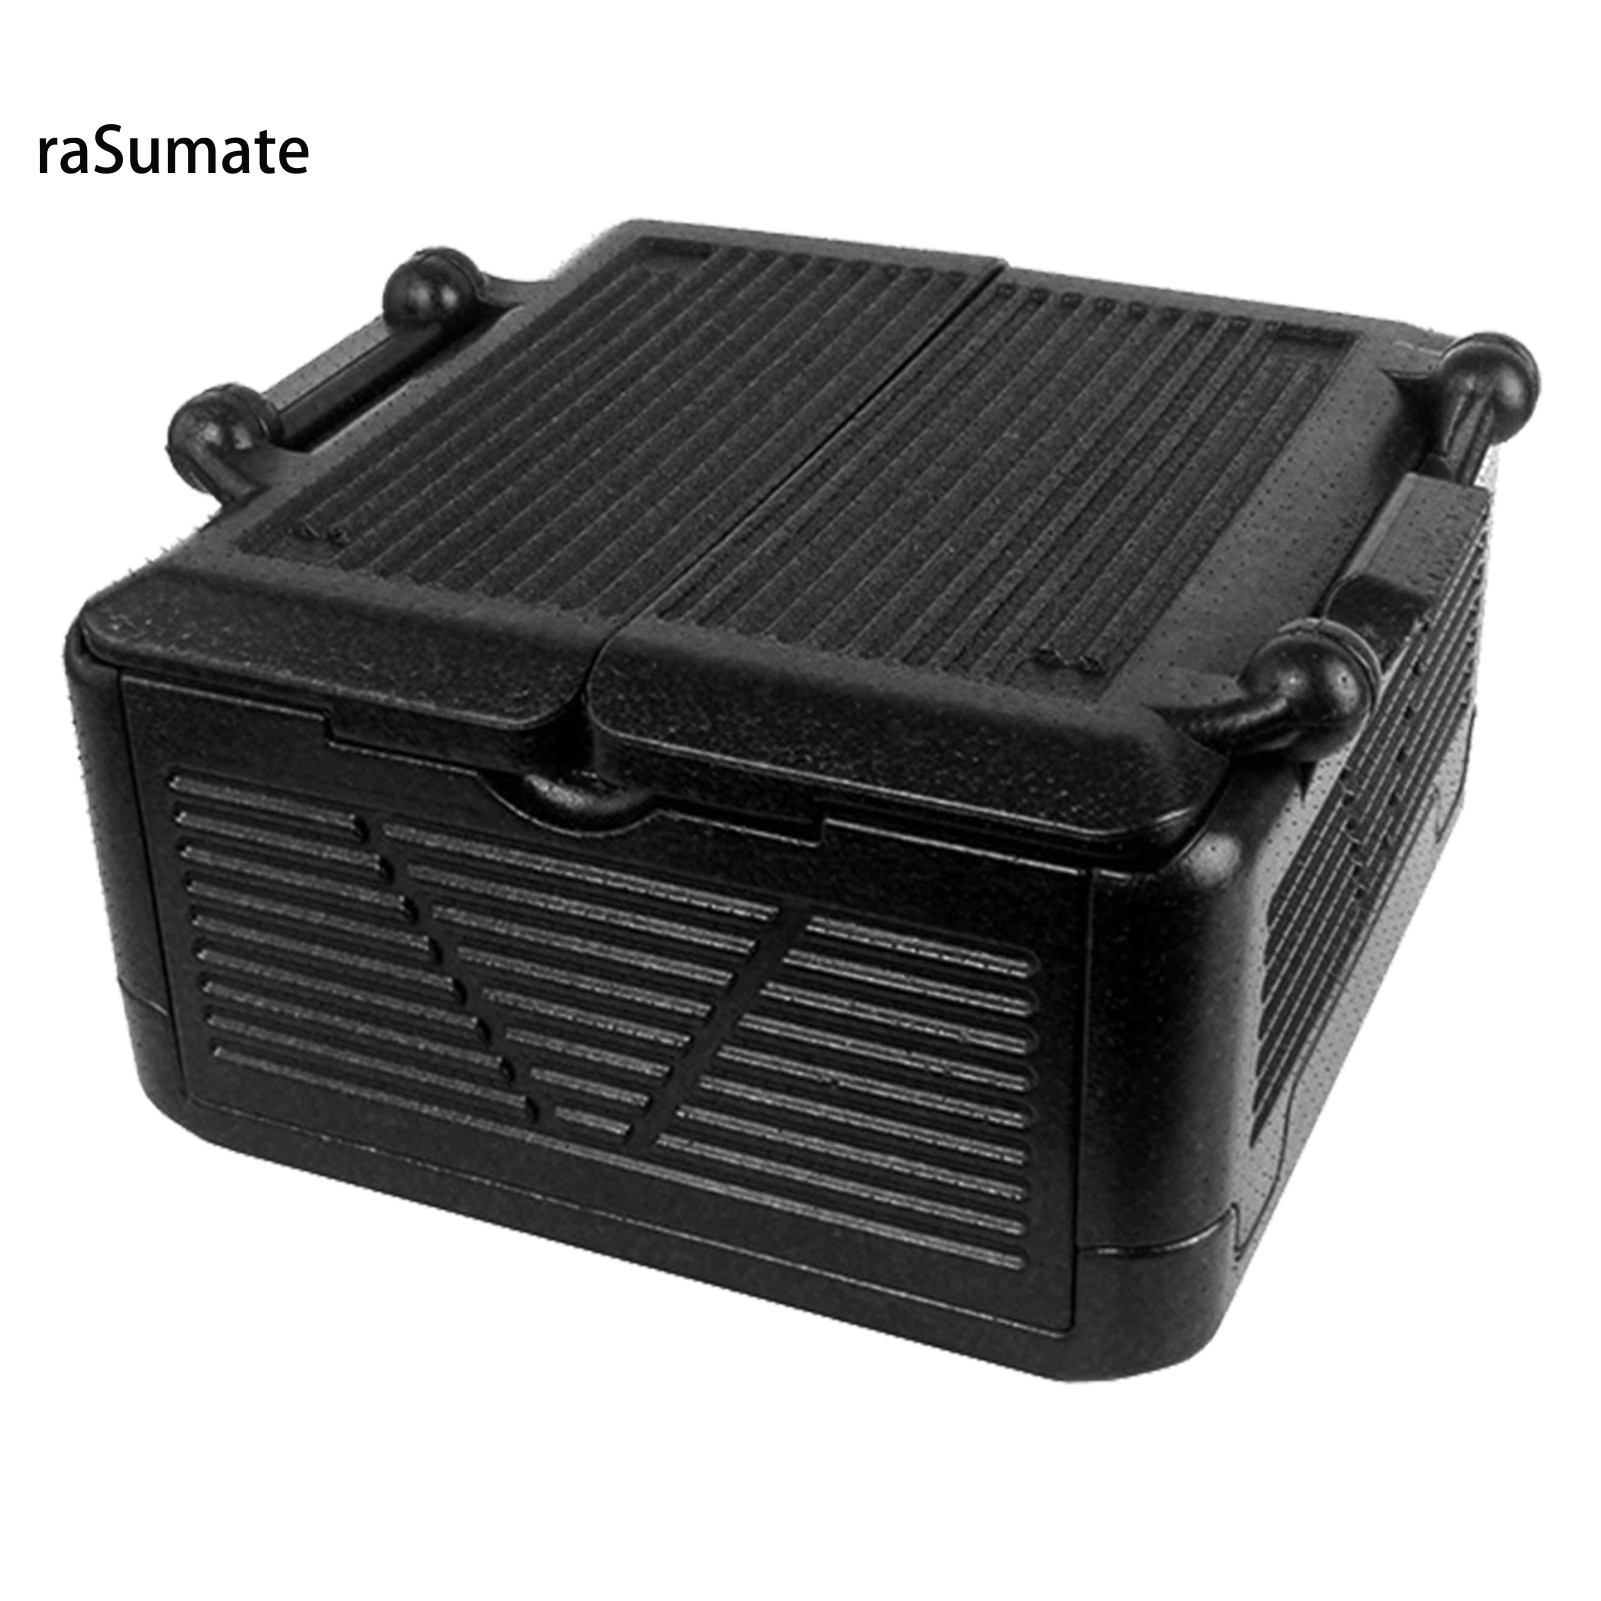 raSumate_my Sports  Travel Cool Appearance Portable Food Warmer Harmless Easy to Use Incubator Insulation Box Easy to Use for Outdoor